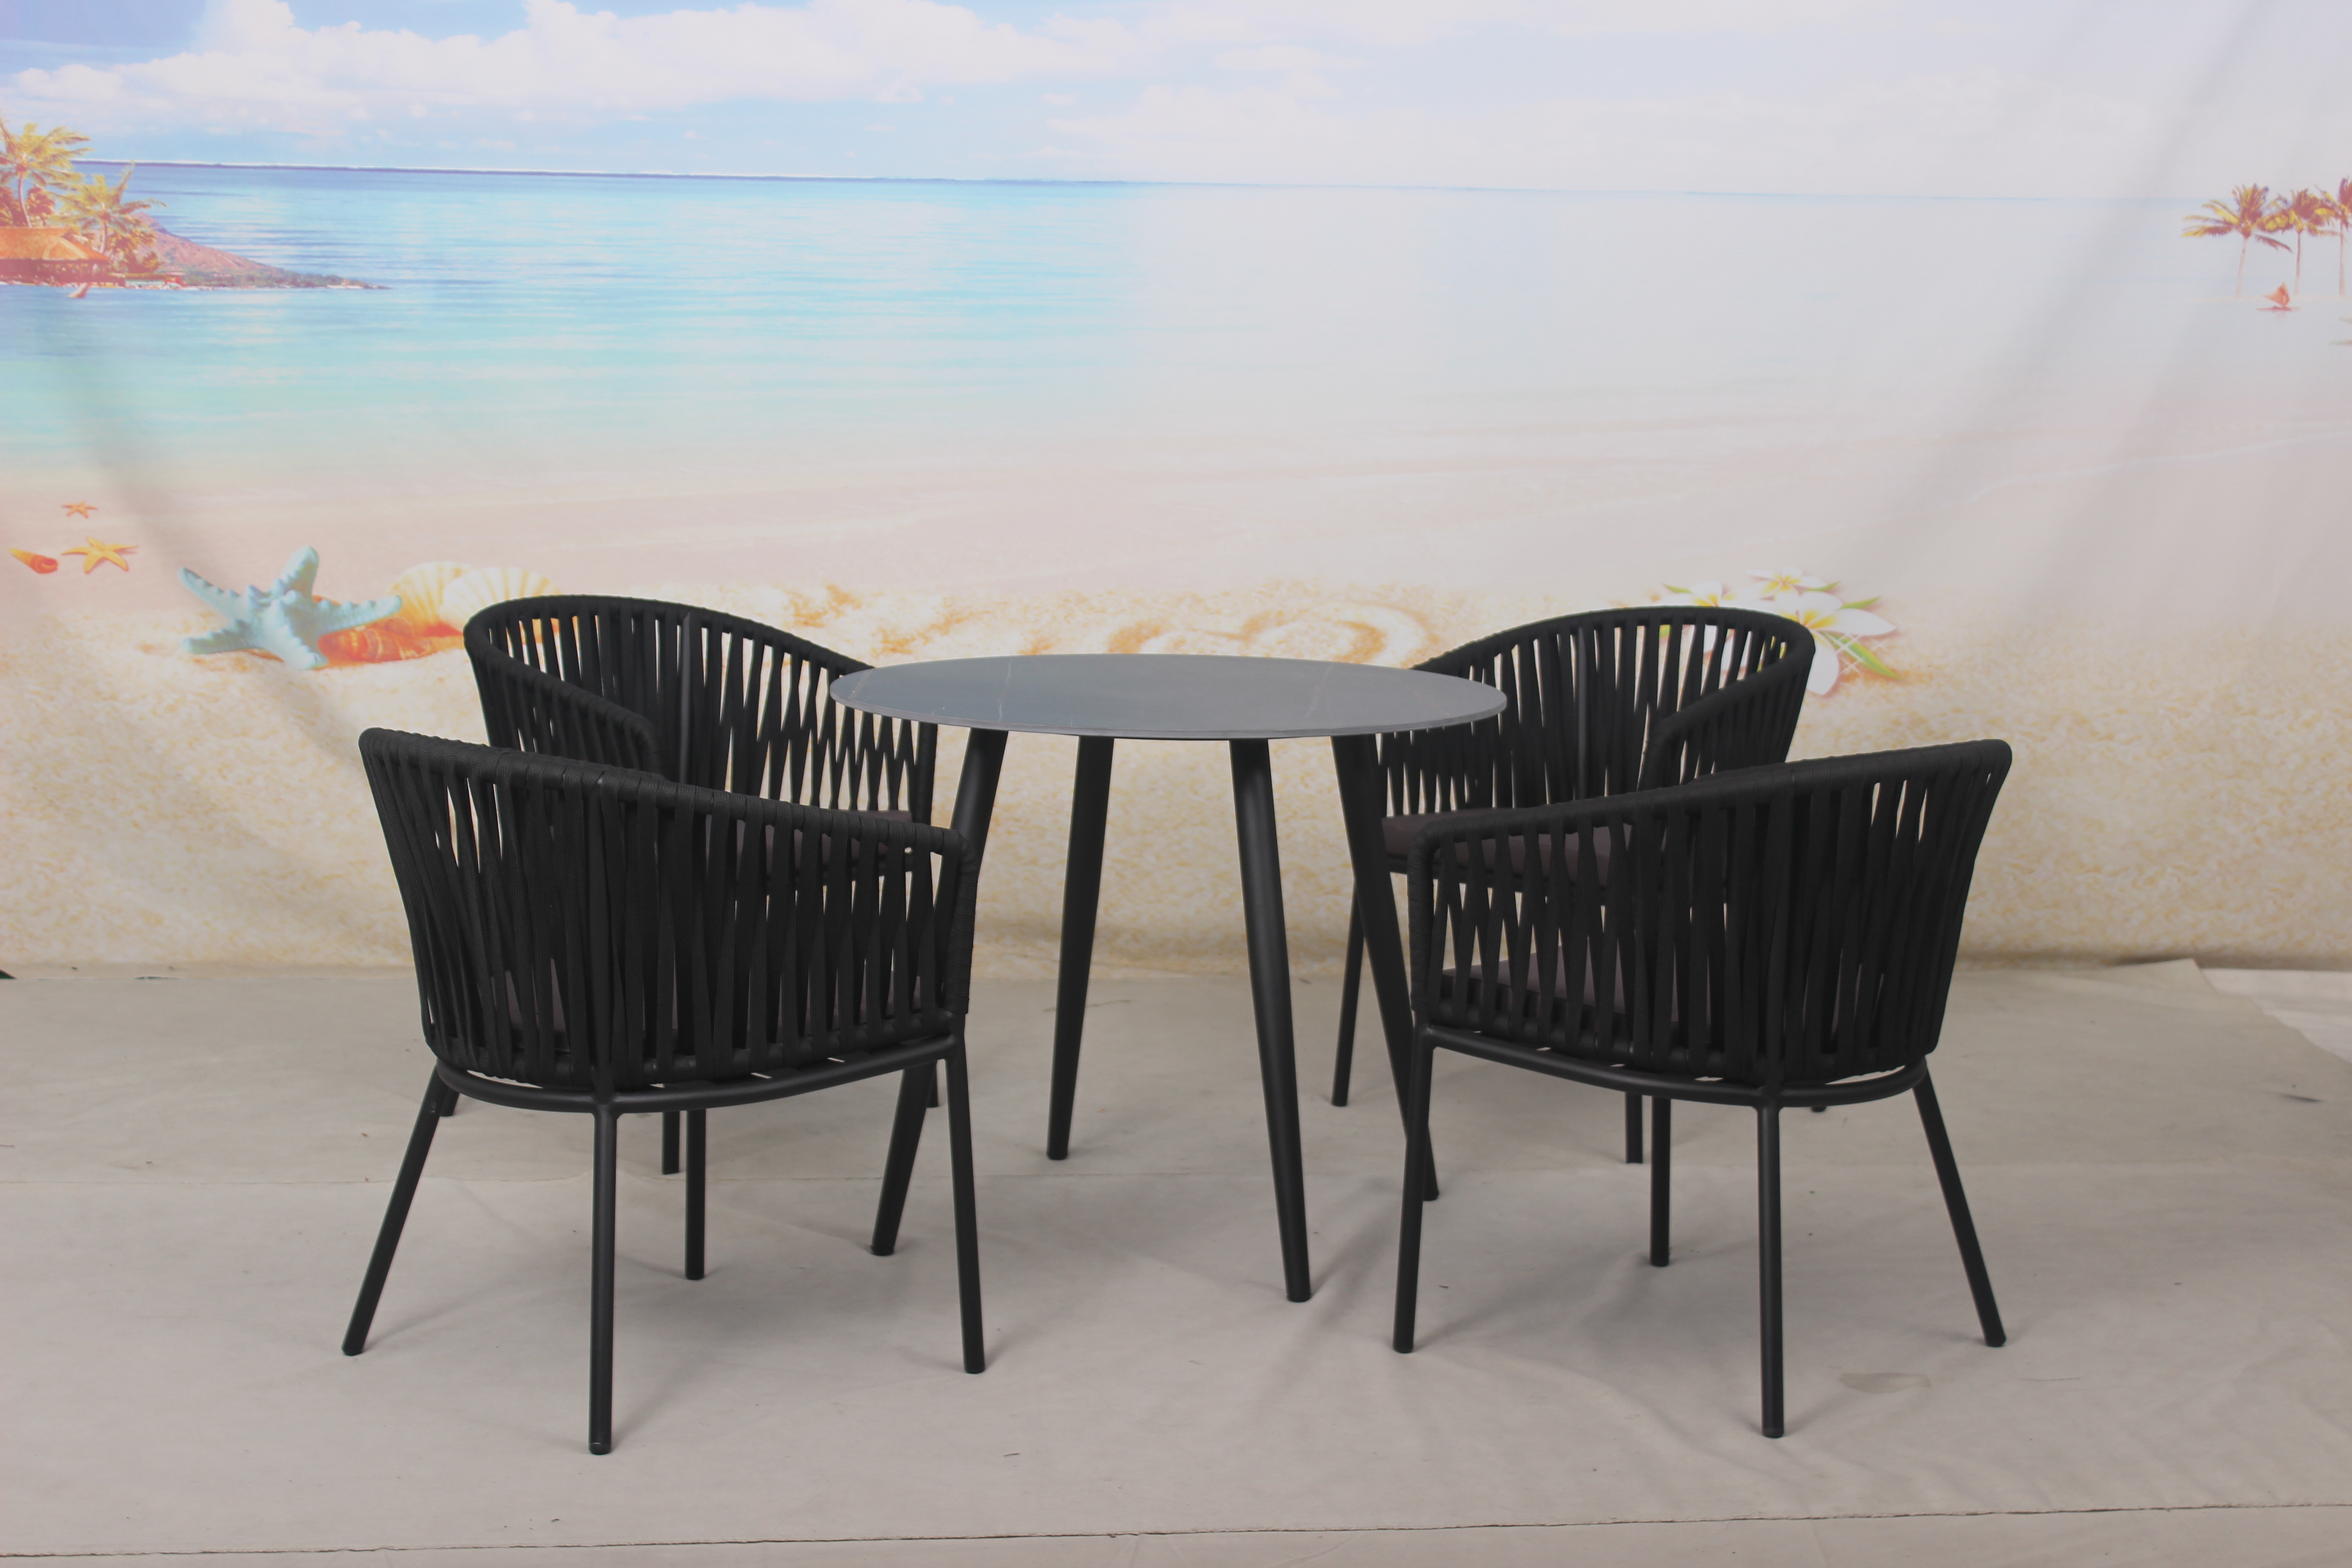 Patio rope dining chair set